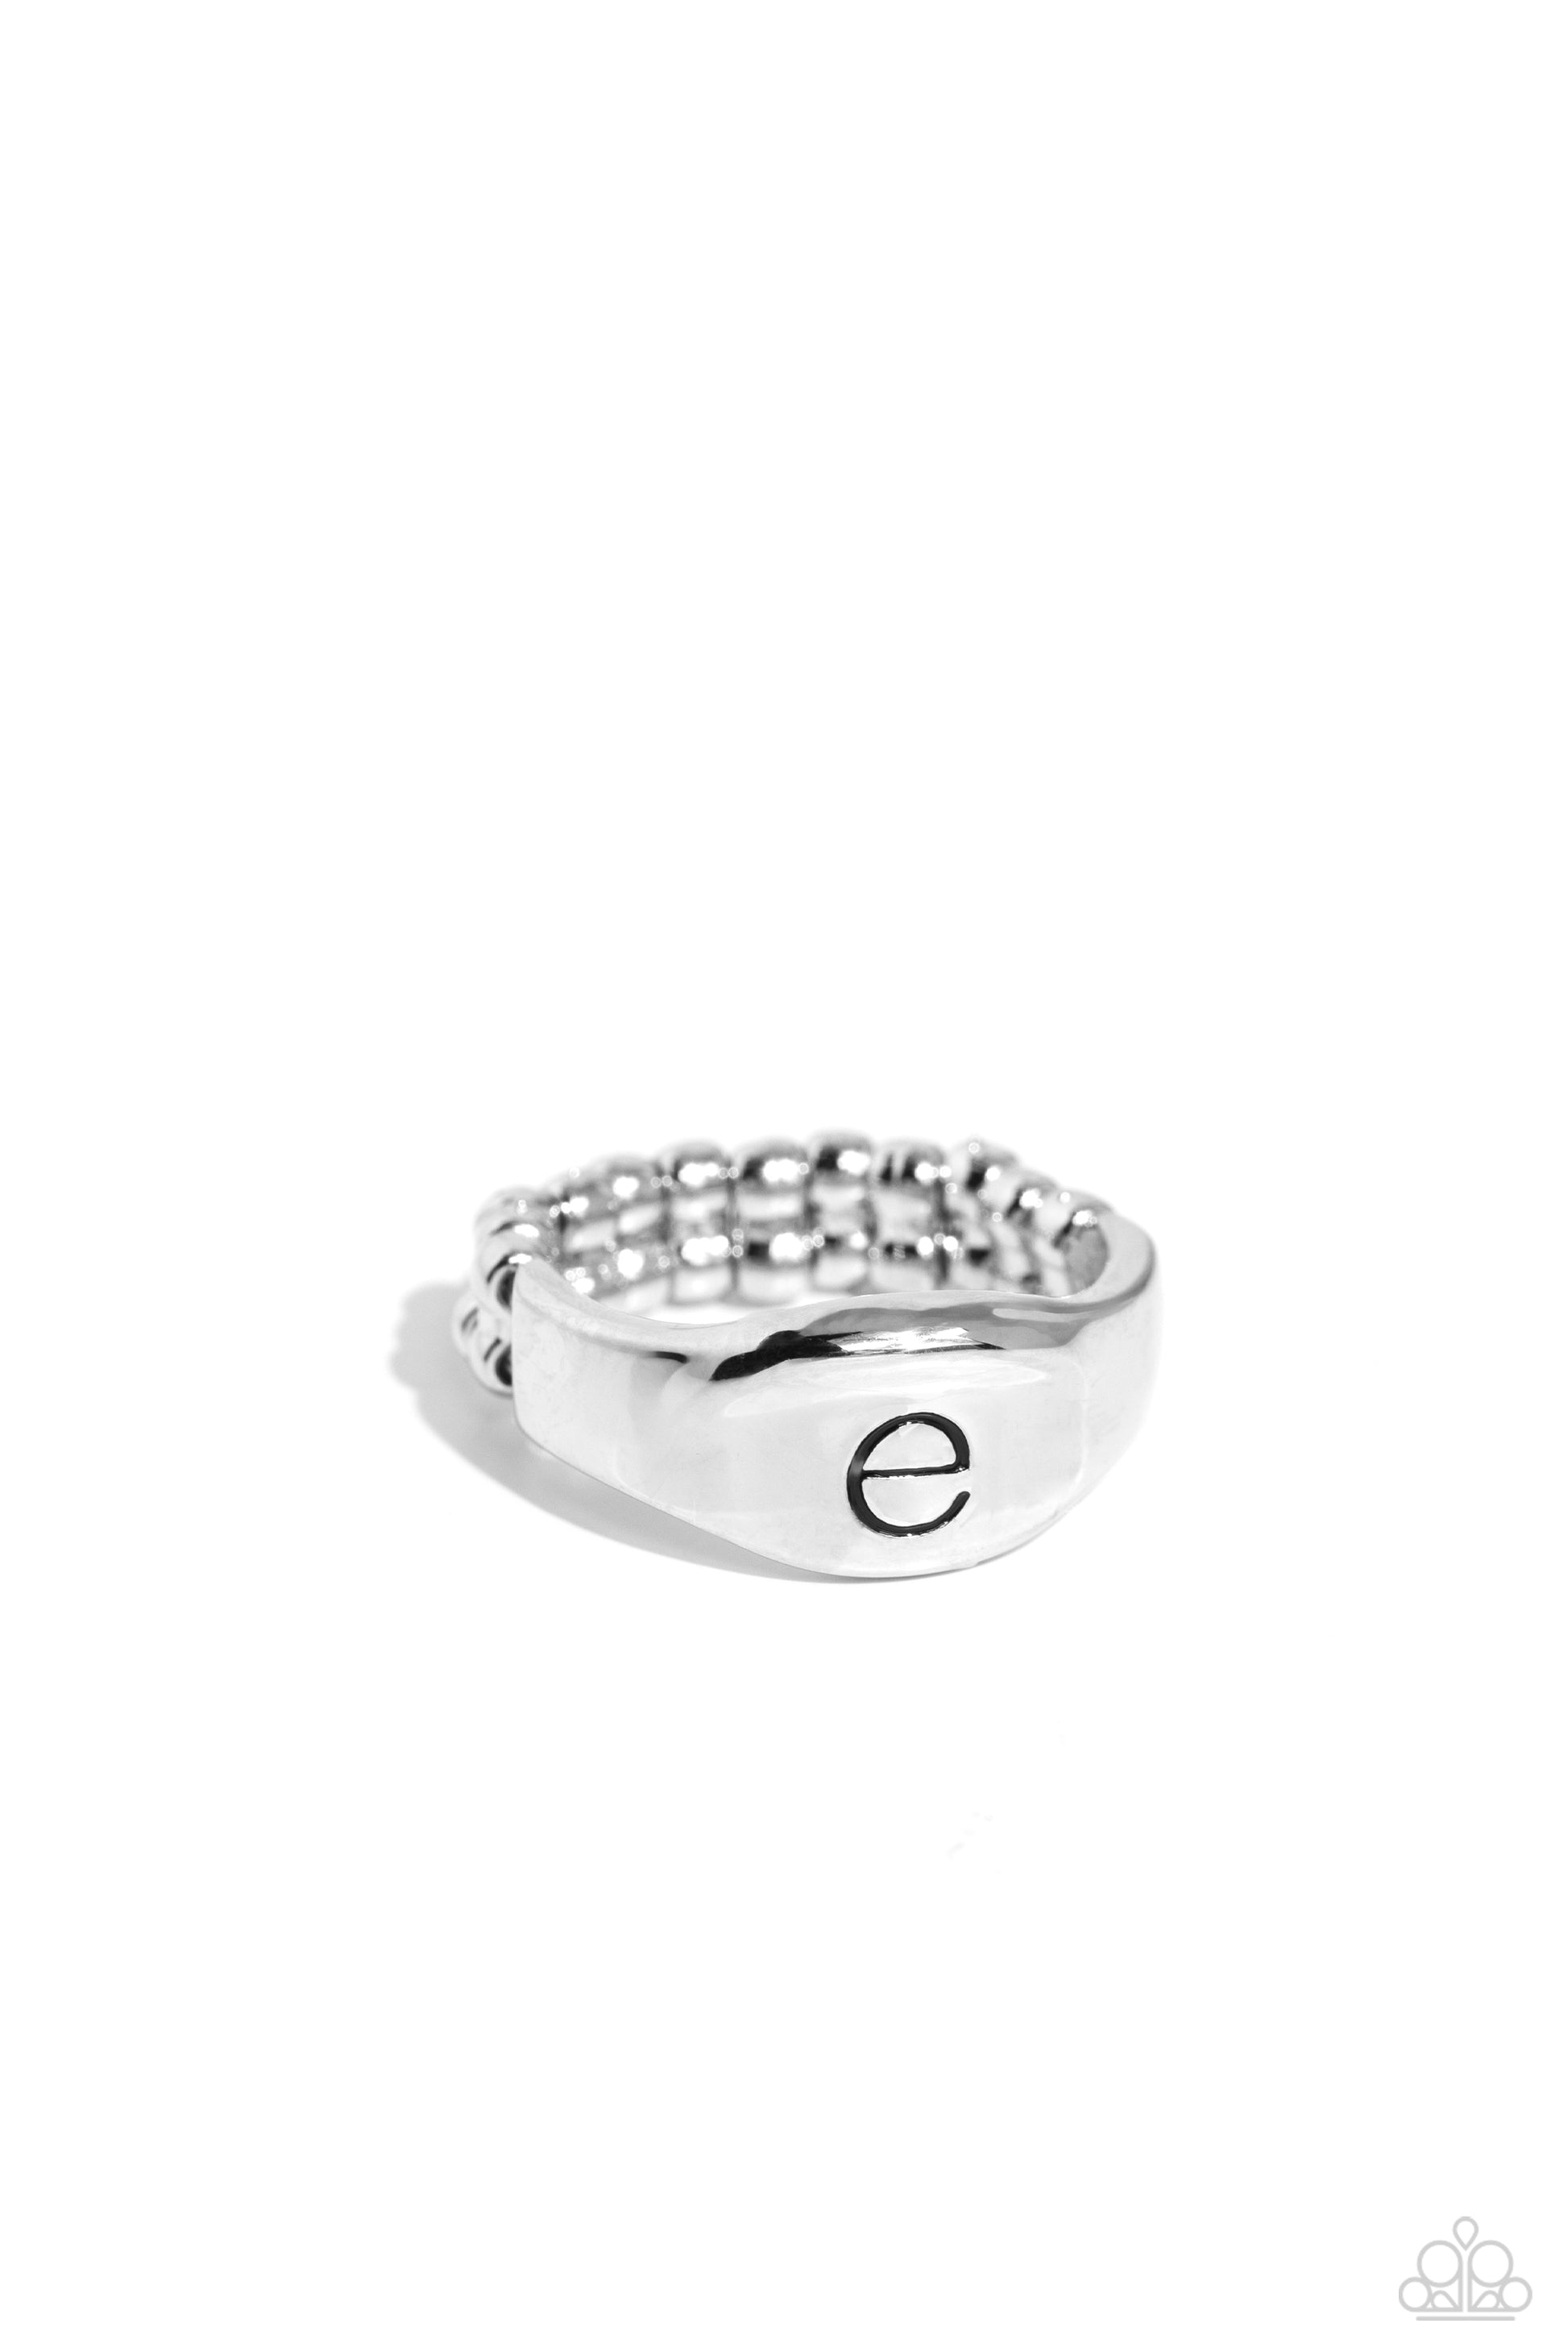 <p>Pressed into the center of a beveled silver band, the black letter "e" stands out for a simple, sentimental centerpiece. Features a stretchy band for a flexible fit.</p> <p><i> Sold as one individual ring.</i></p>